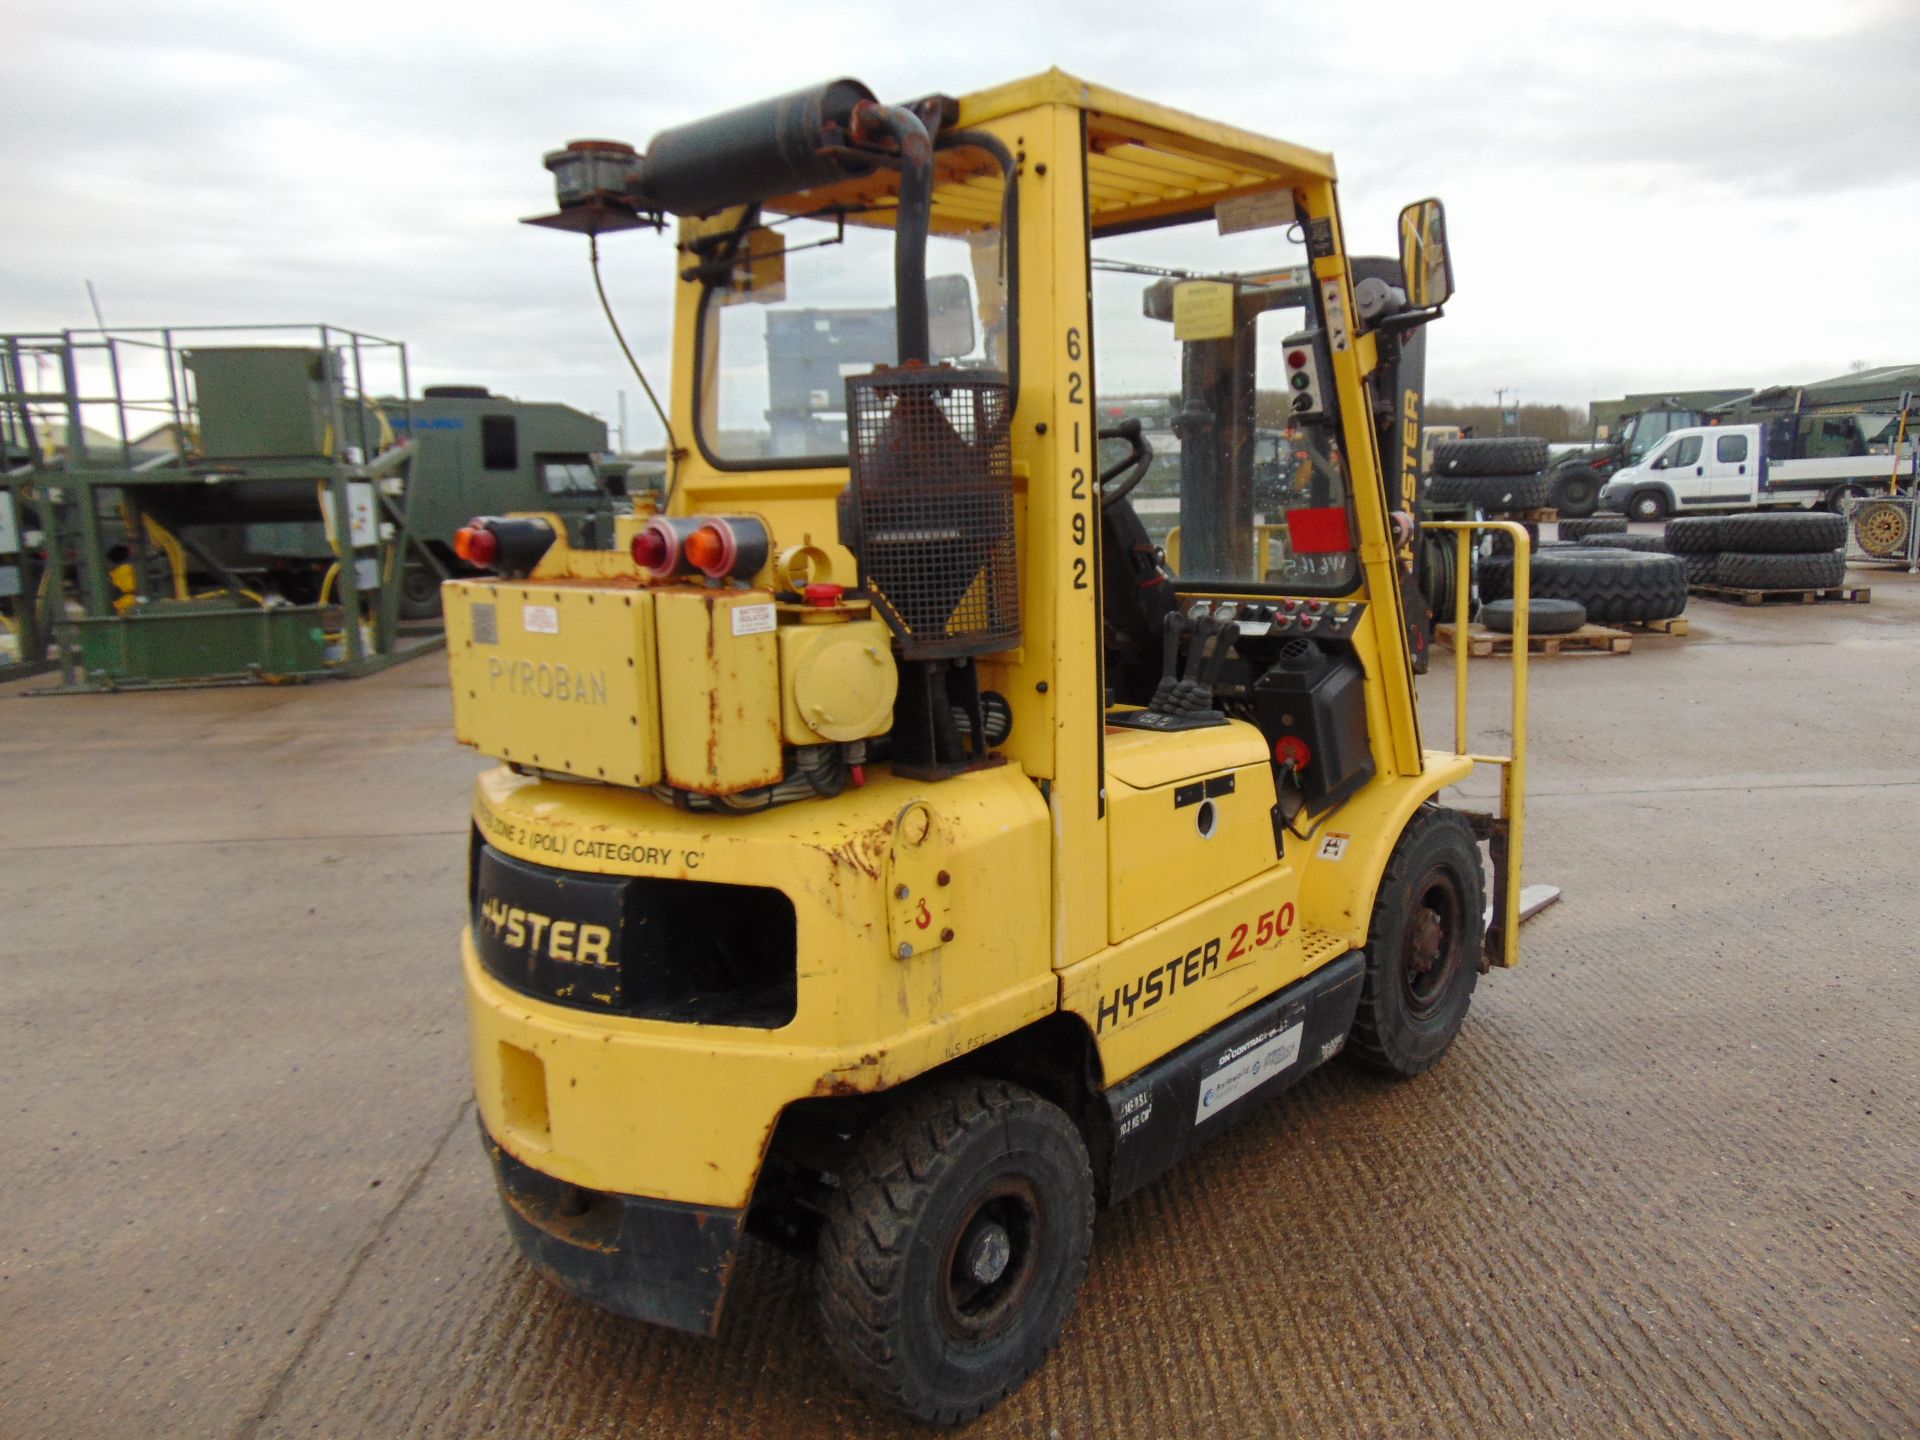 Hyster 2.50 Class C, Zone 2 Protected Diesel Forklift - Image 7 of 25